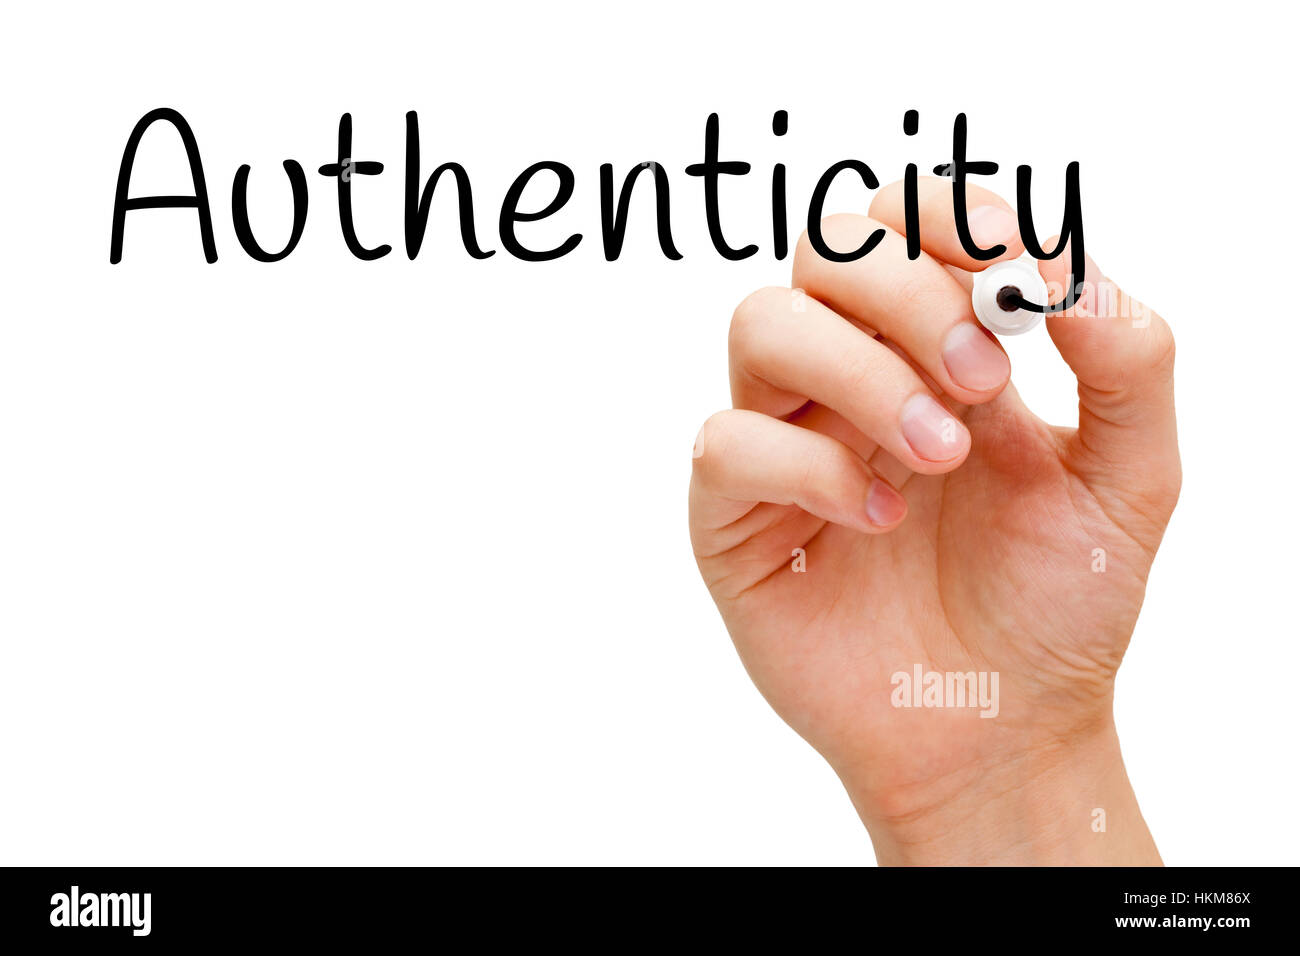 Hand writing Authenticity with black marker on transparent glass board. Stock Photo